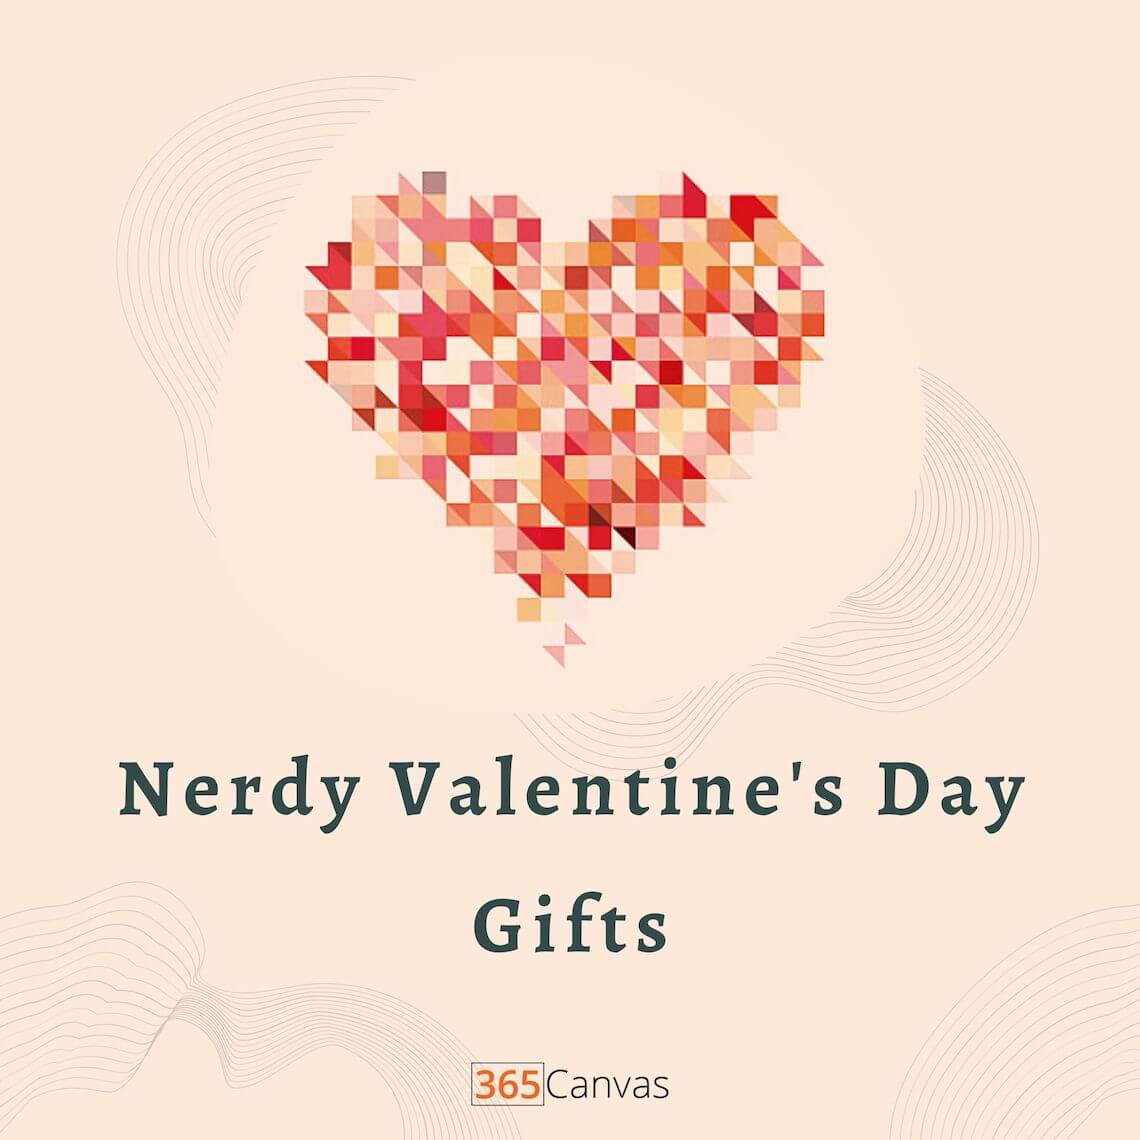 27 Nerdy Valentine’s Day Gifts to Light Up Their Heart in 2022